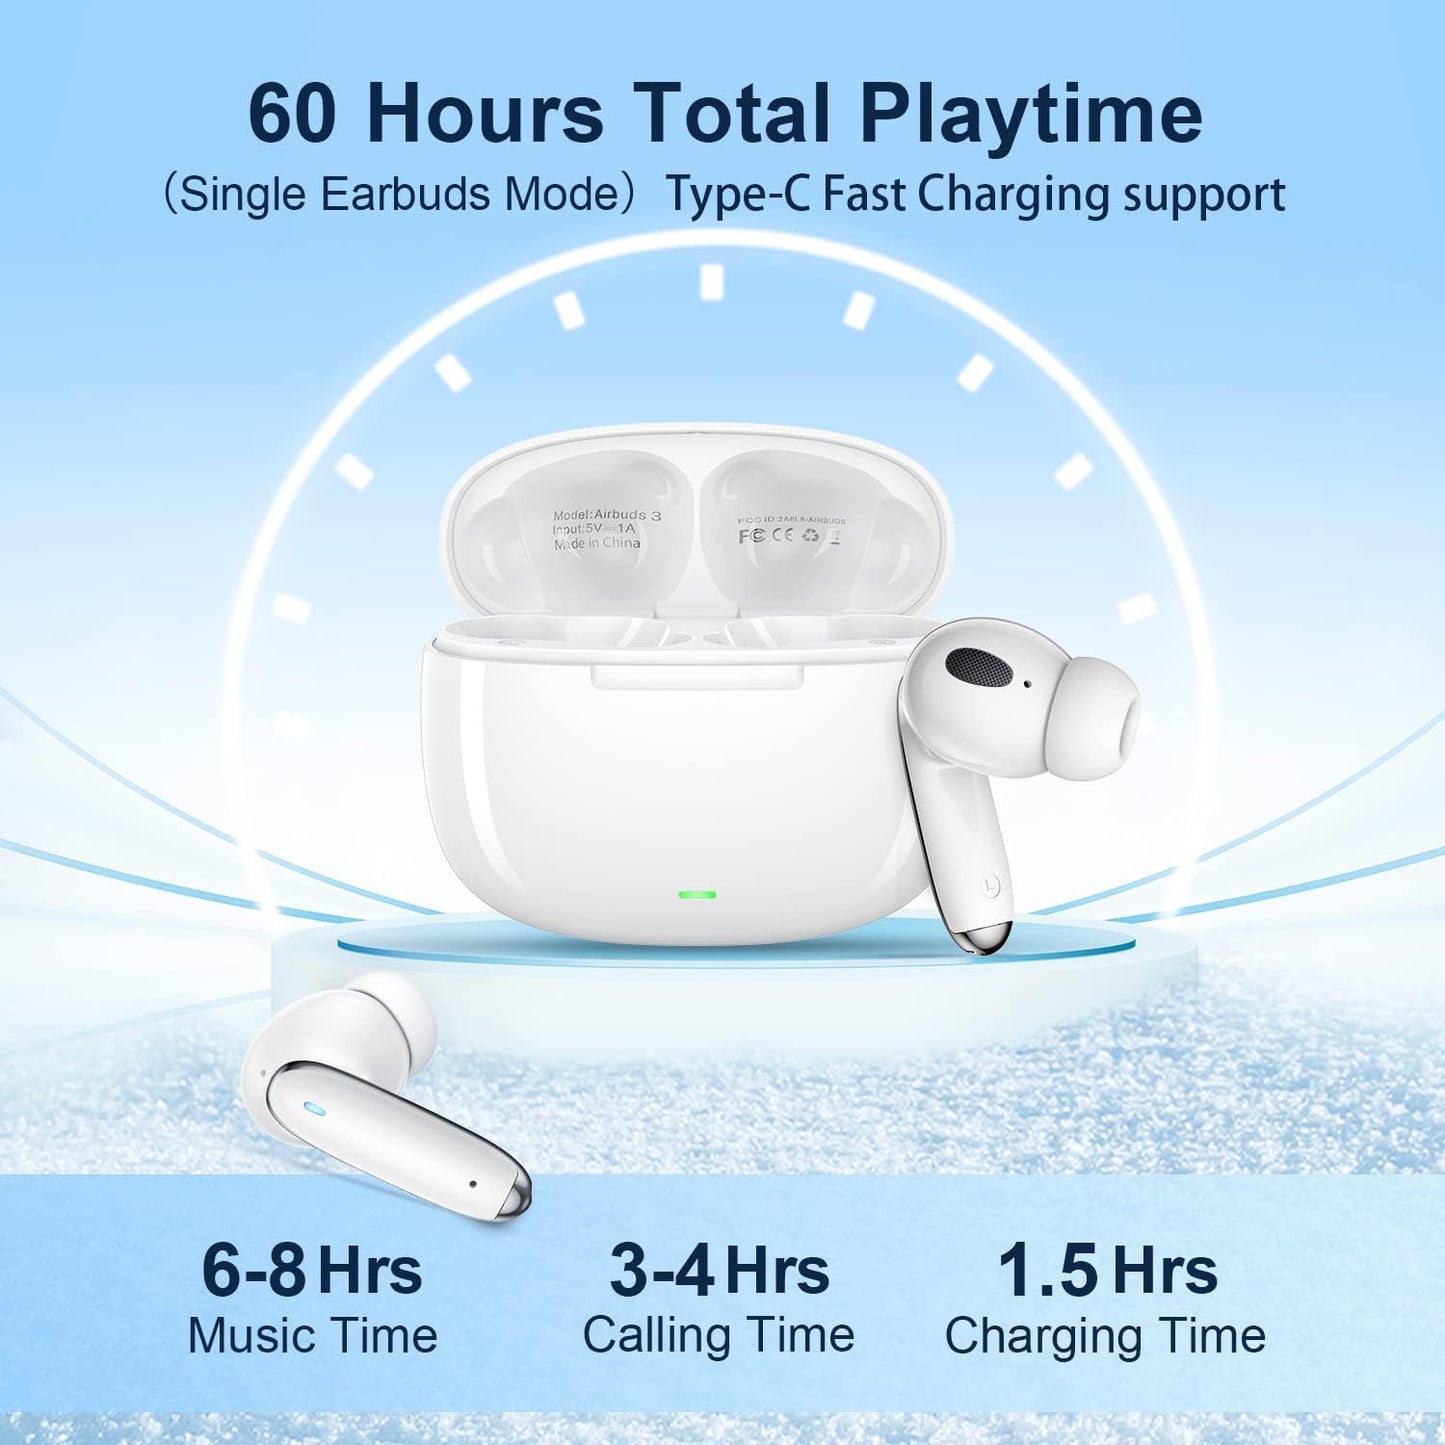 Wireless Earbuds Bluetooth Earbuds with Deep Bass Wireless Headphones Noise Cancelling Ear Buds in-Ear Earphones Air Buds 60Hrs Playtime Bluetooth Headphones with Mic for iPhone Android Pods